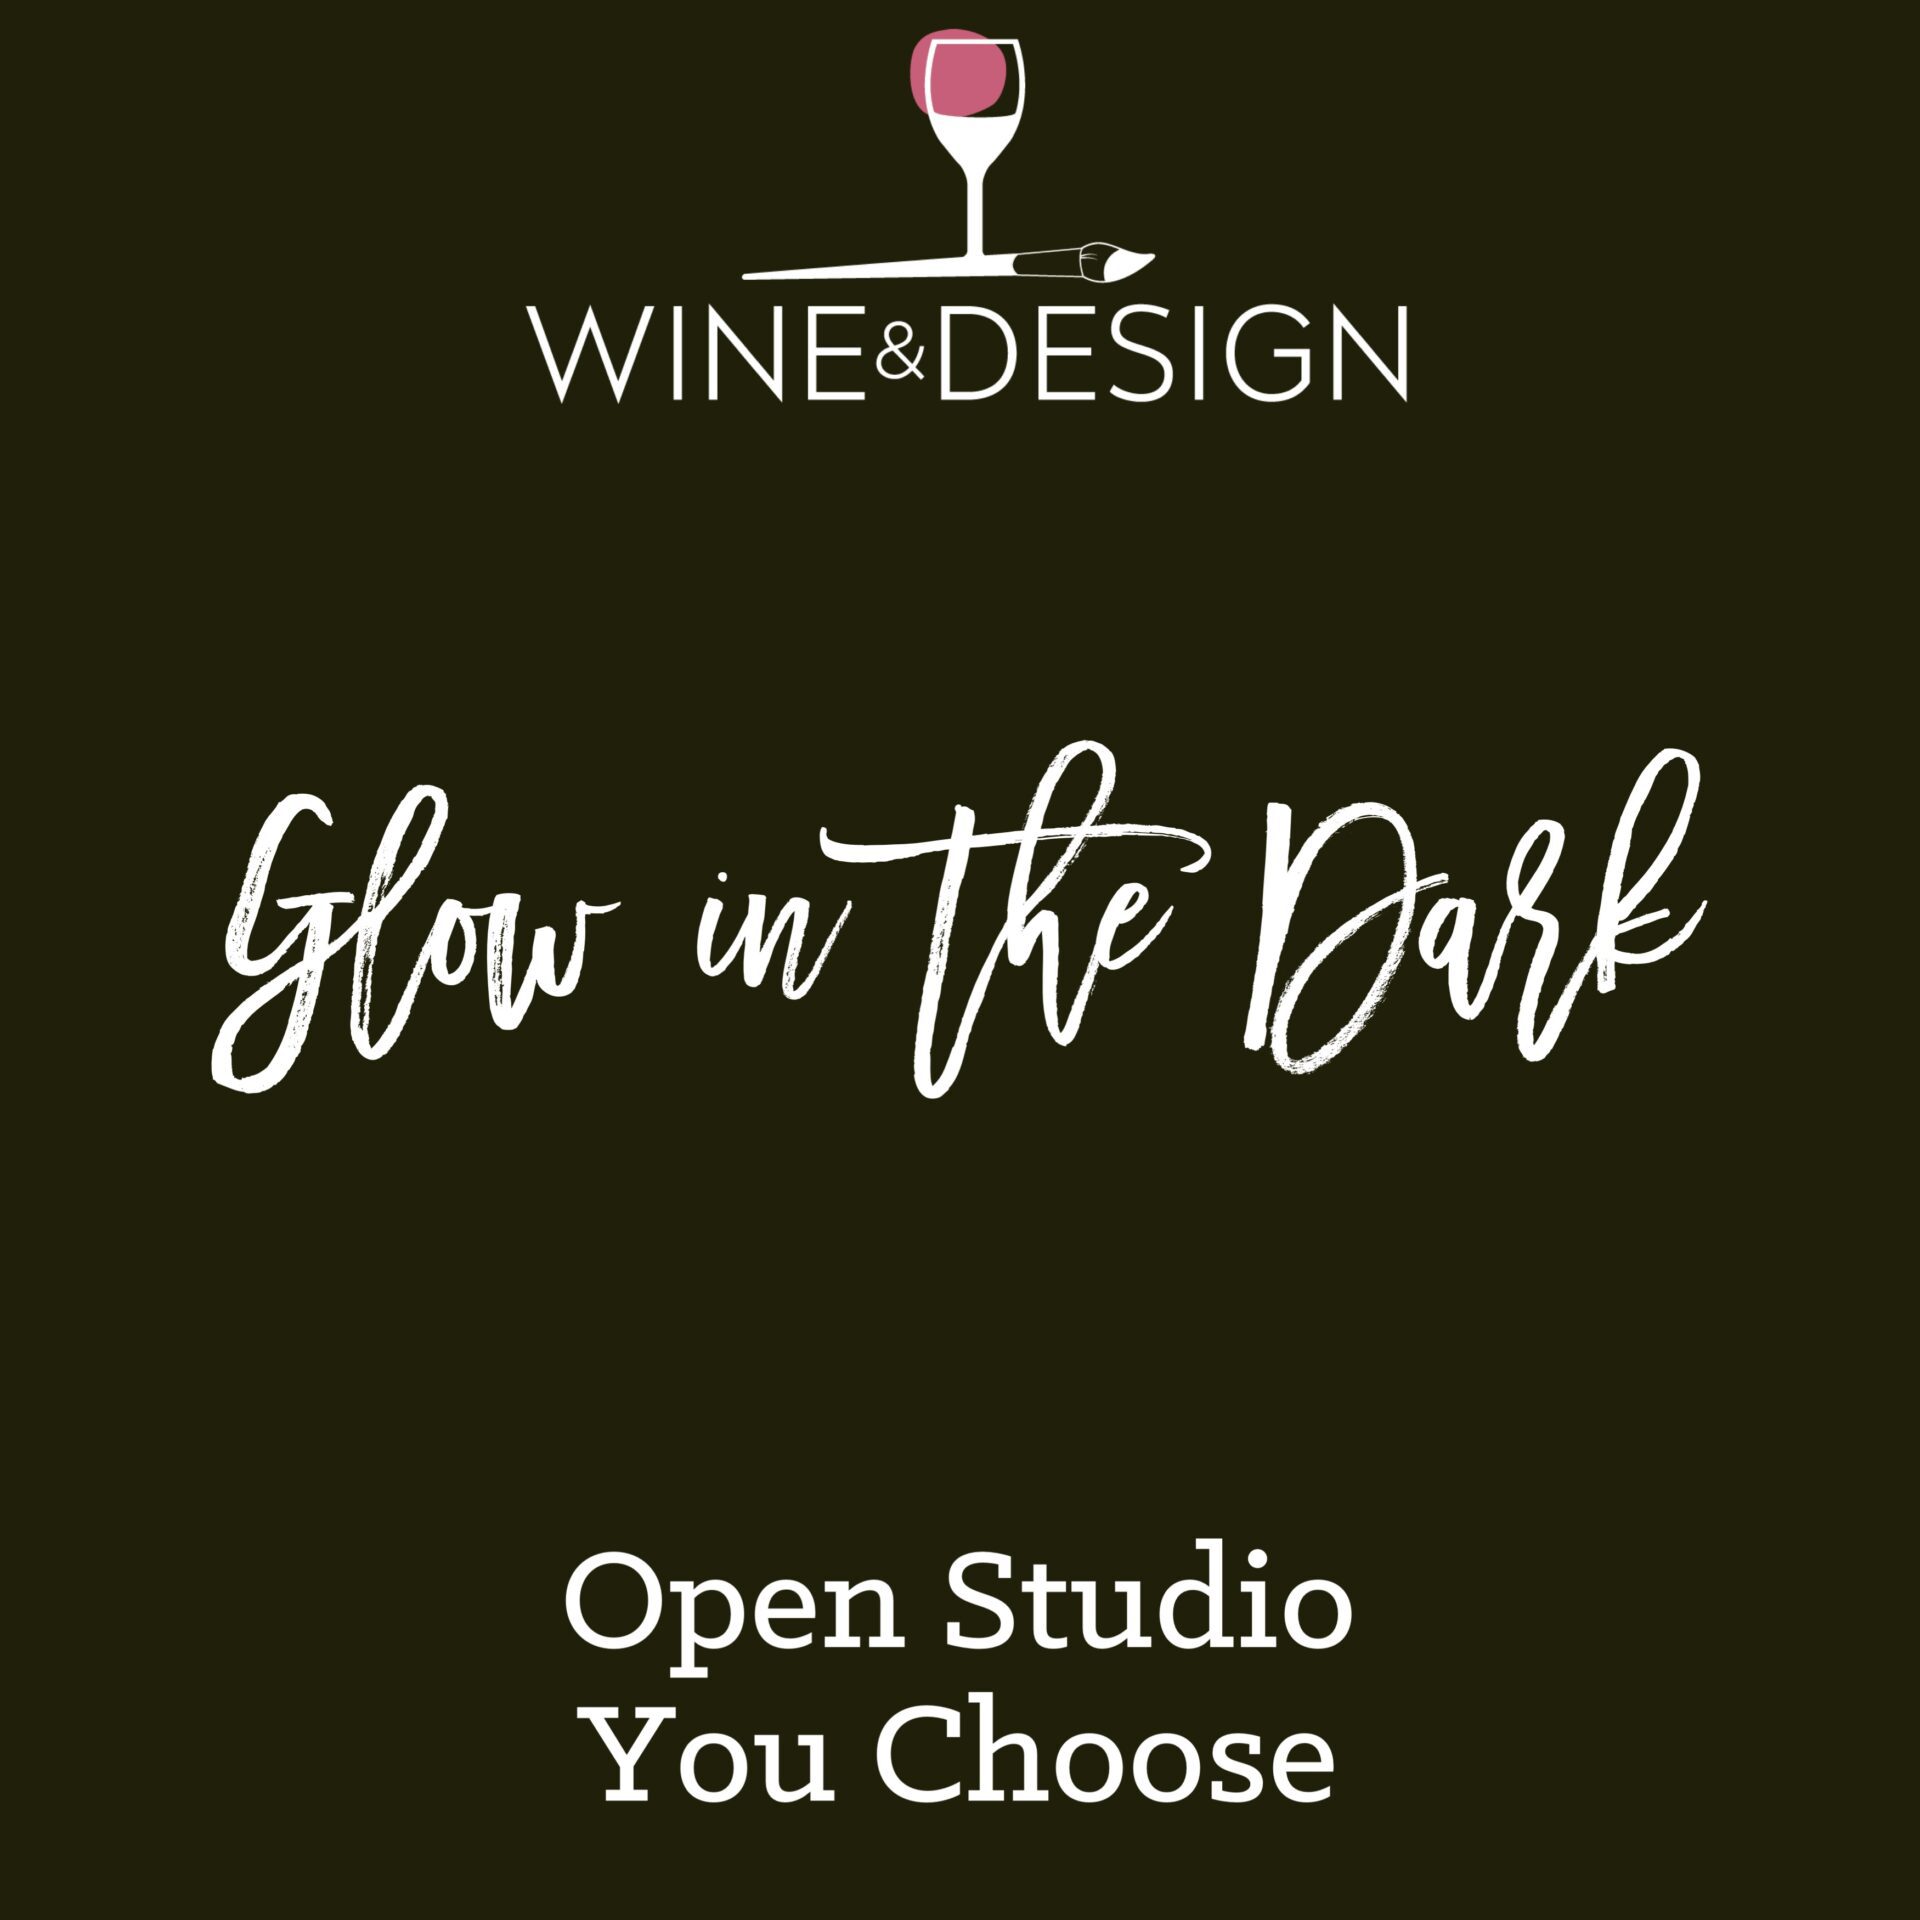 Wine & Design Franklin in-studio 5th Anniversary Glow in the Dark Paint & Sip pARTy featuring live DJ and several painting options (including a mystery painting option).